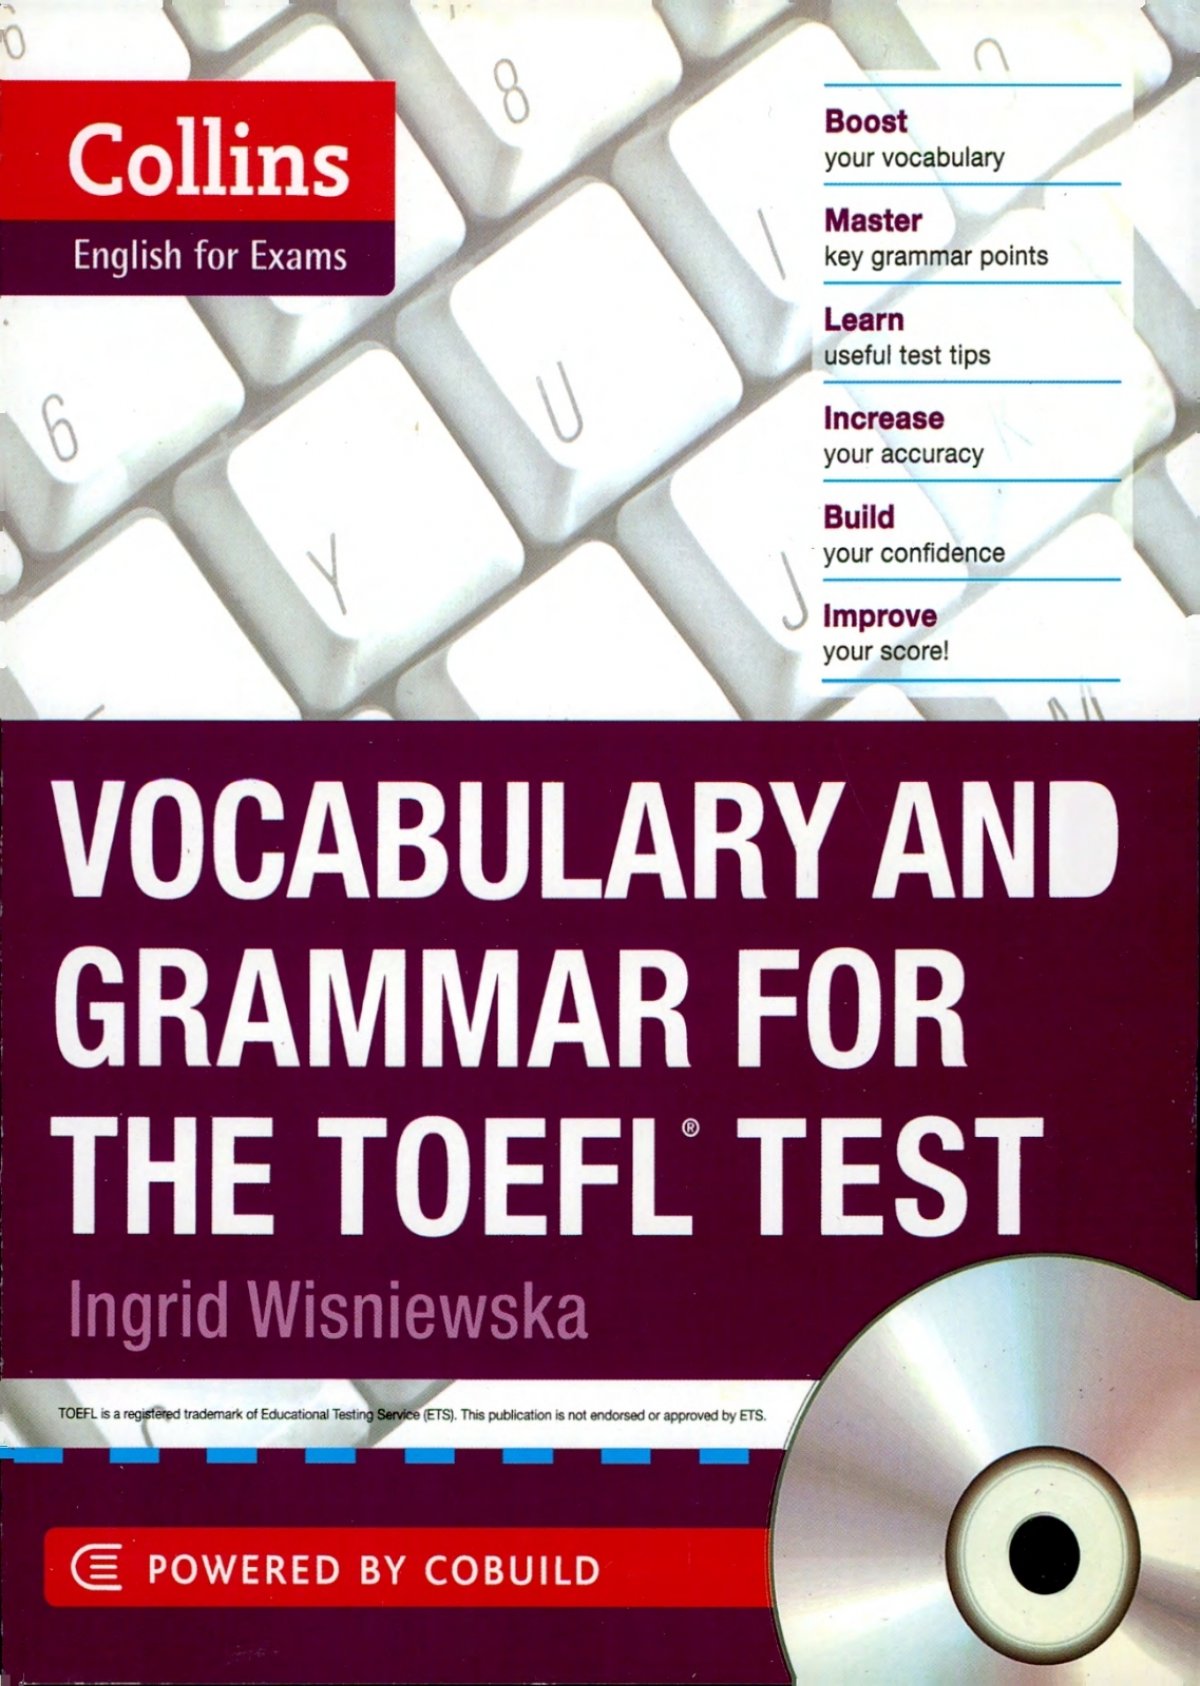 224 1 Collins Vocabulary And Grammar For The Toefl Test 13 192p